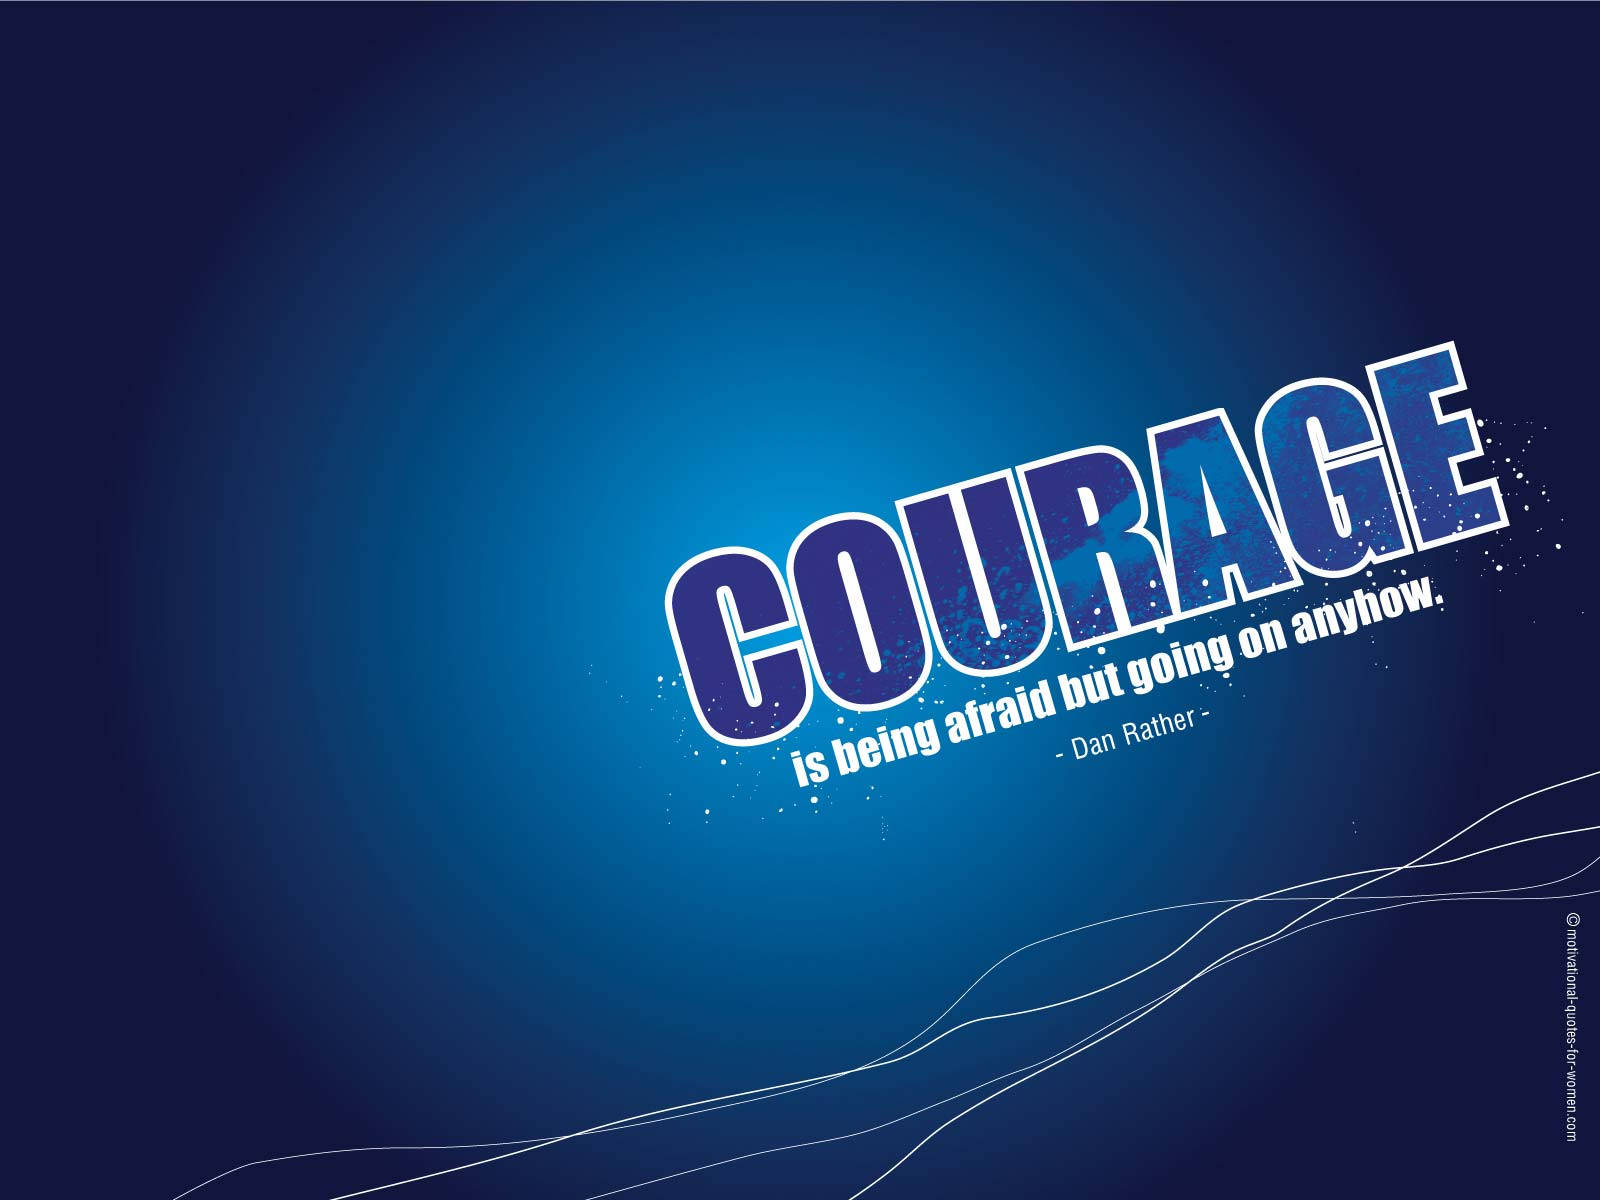 Inspirational Quotes About Courage Wallpaper